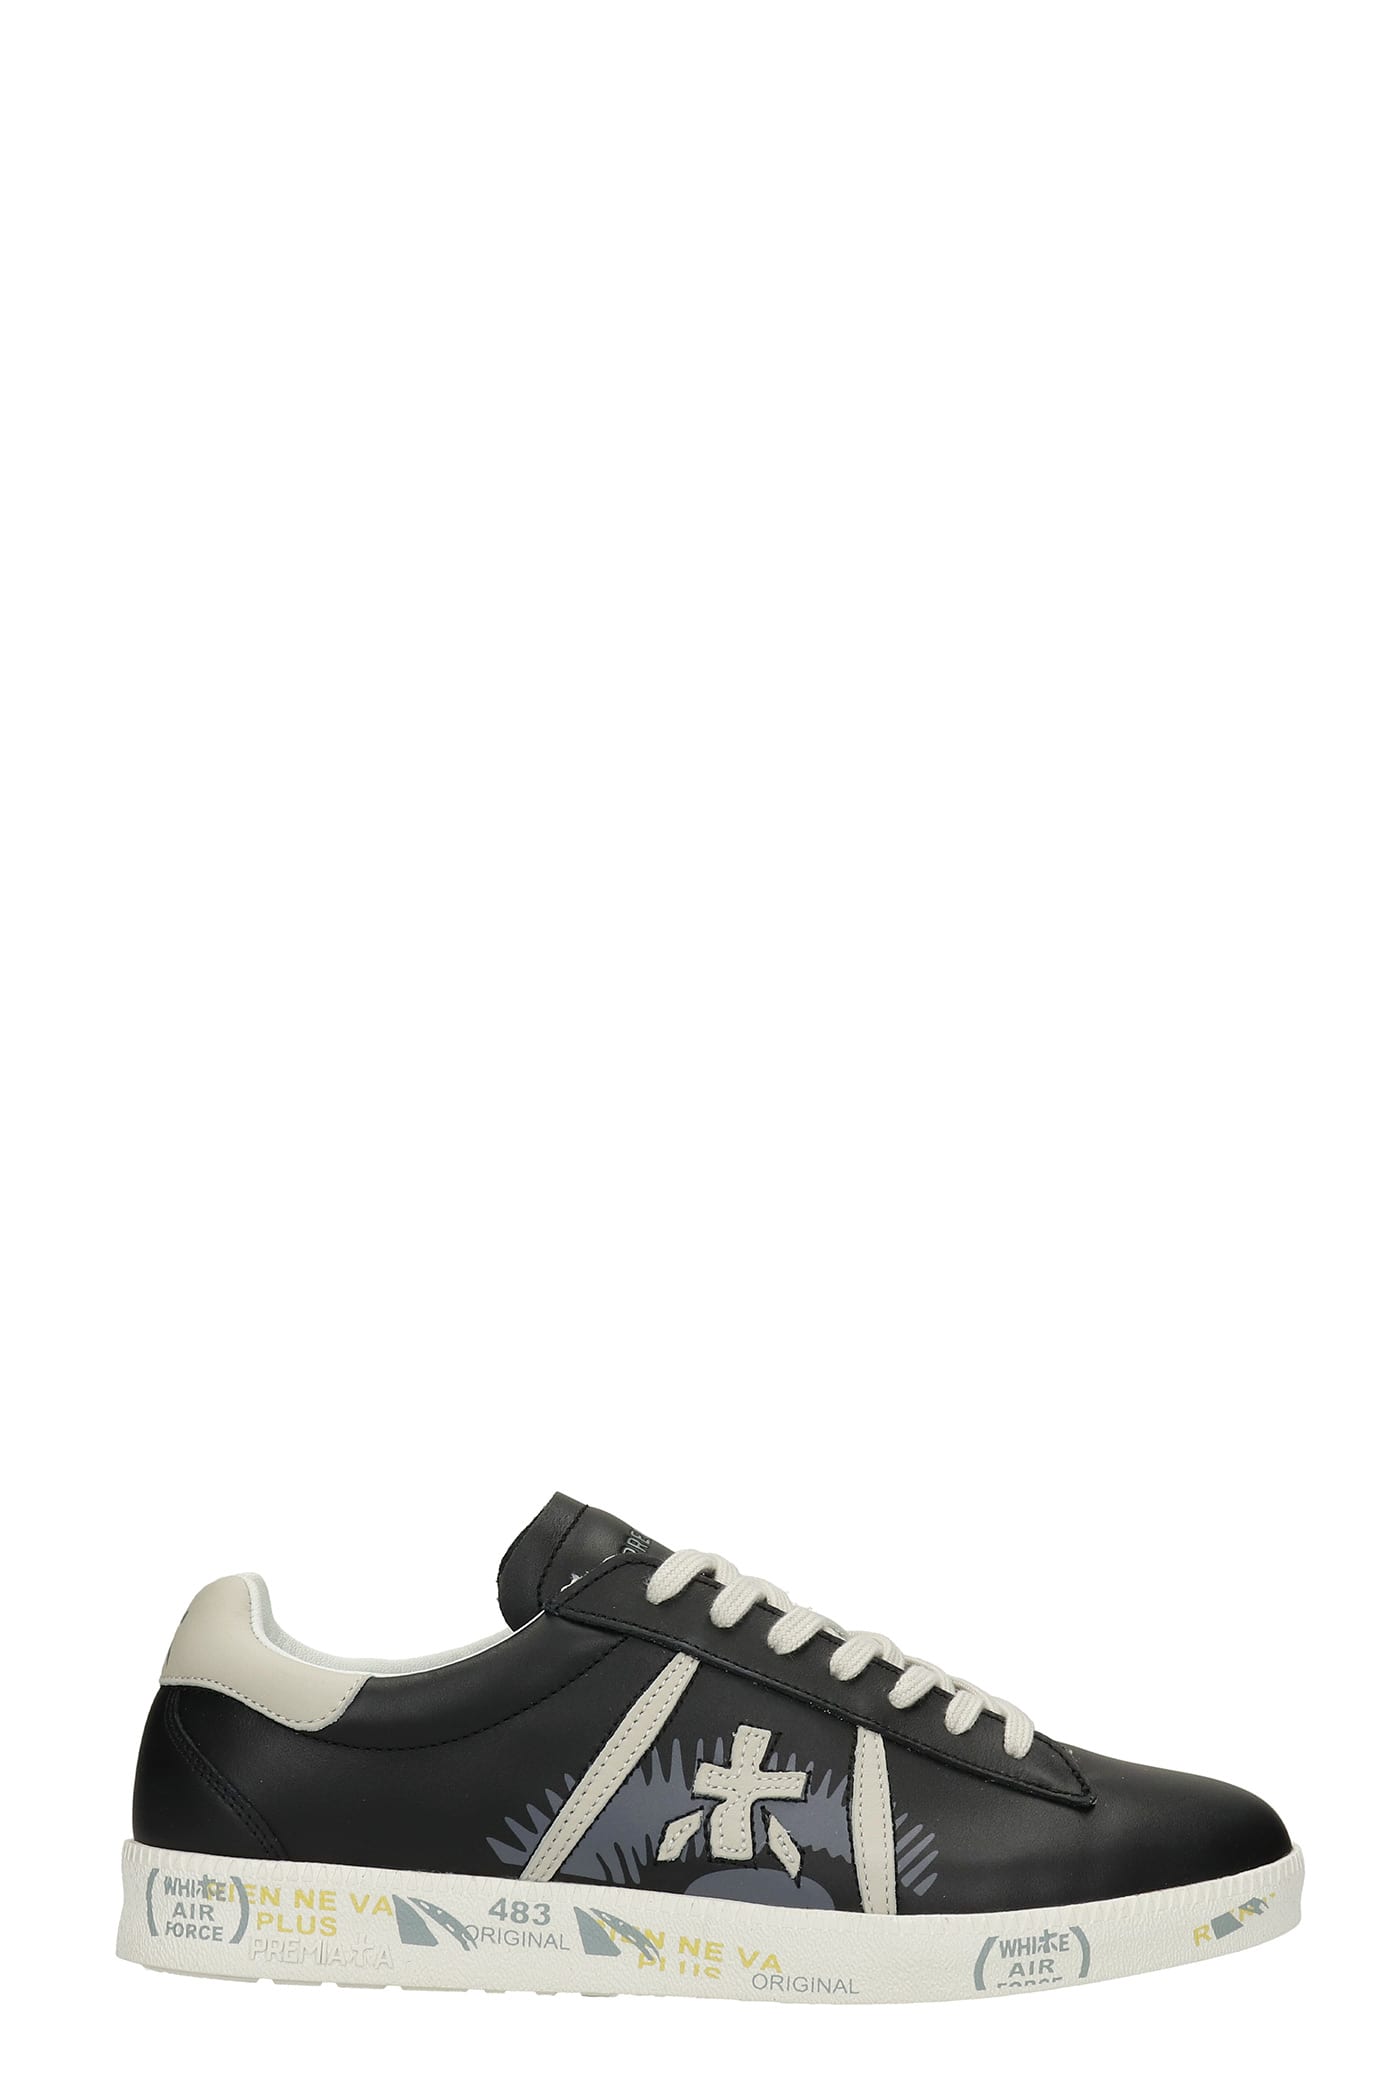 Premiata Andy Sneakers In Black Leather